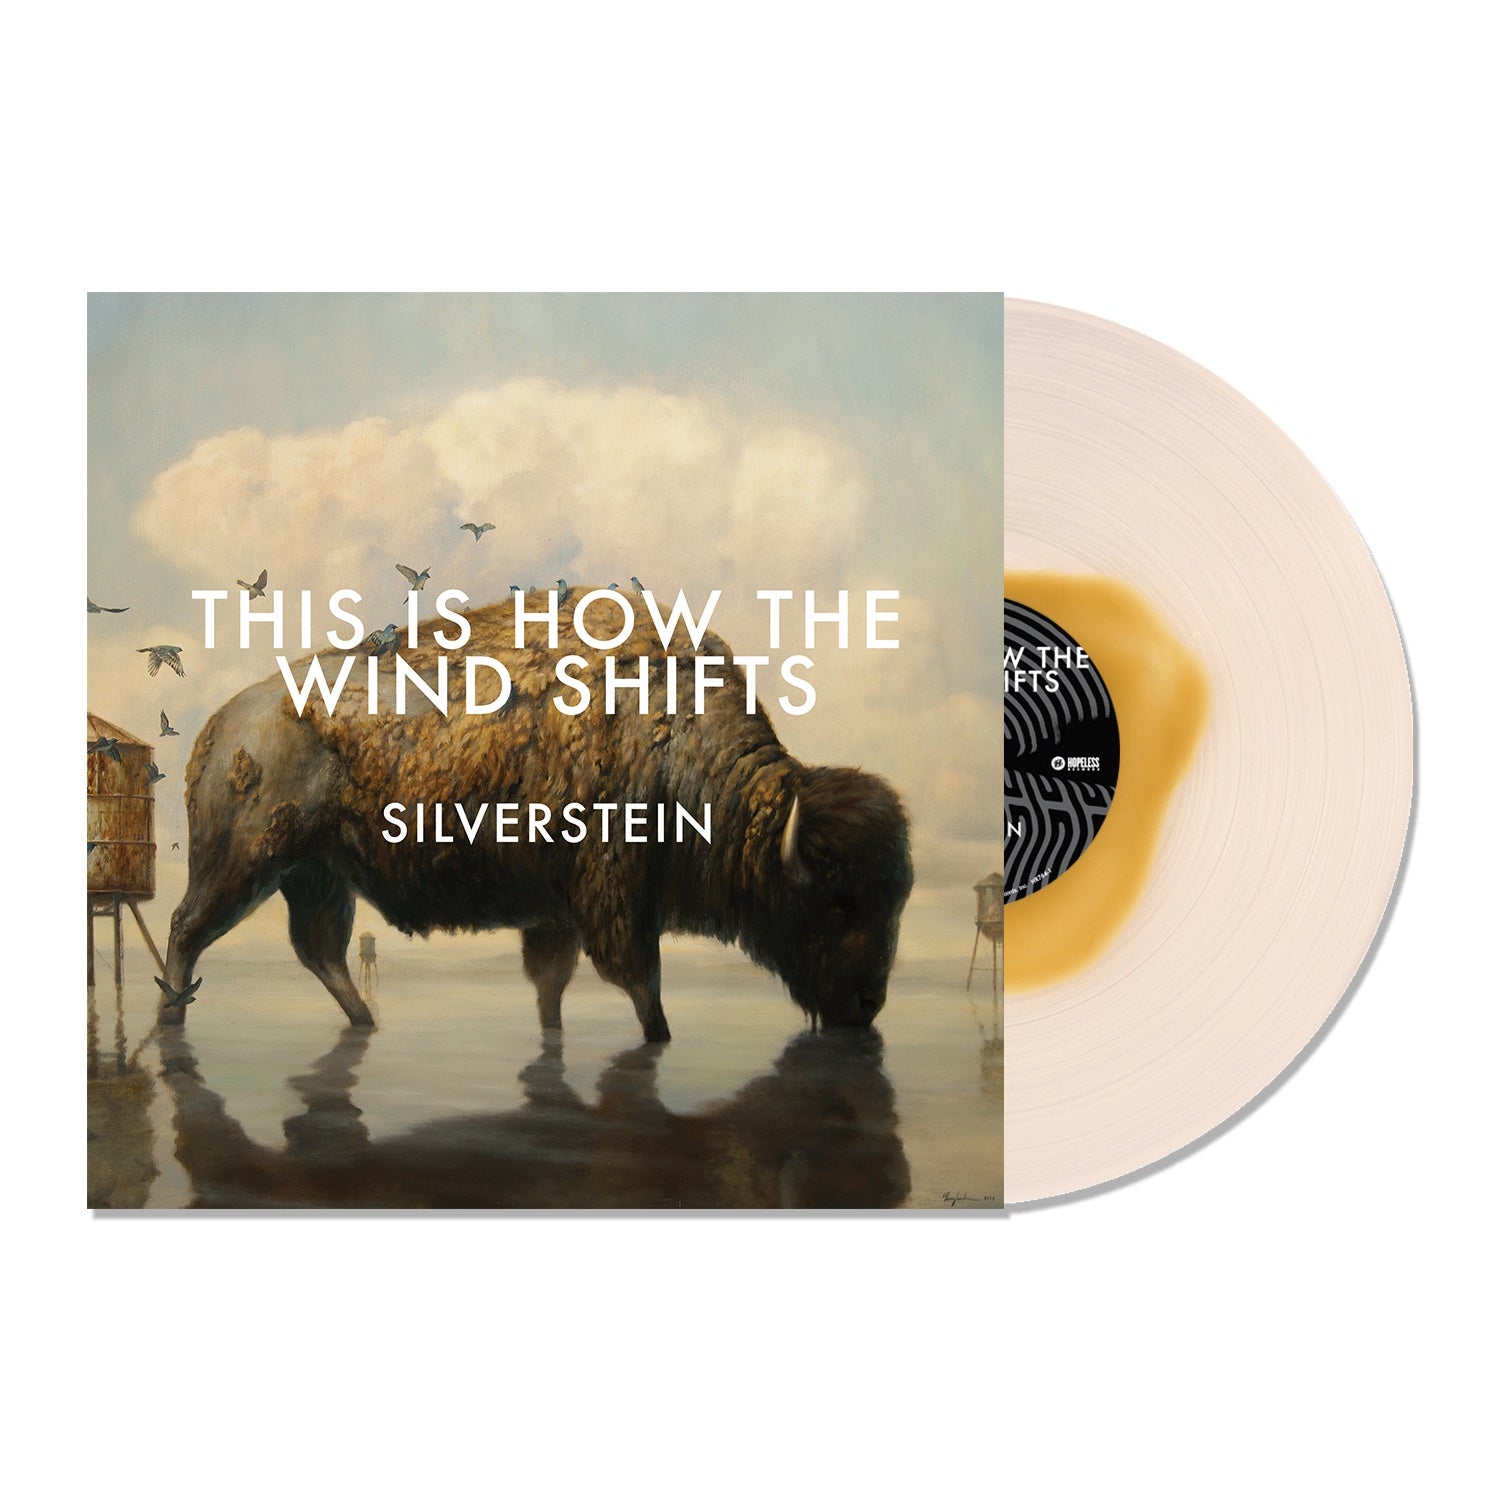 Silverstein - This Is How The Wind Shifts (10th Anniversary): Limited Gold Inside Clear Vinyl LP